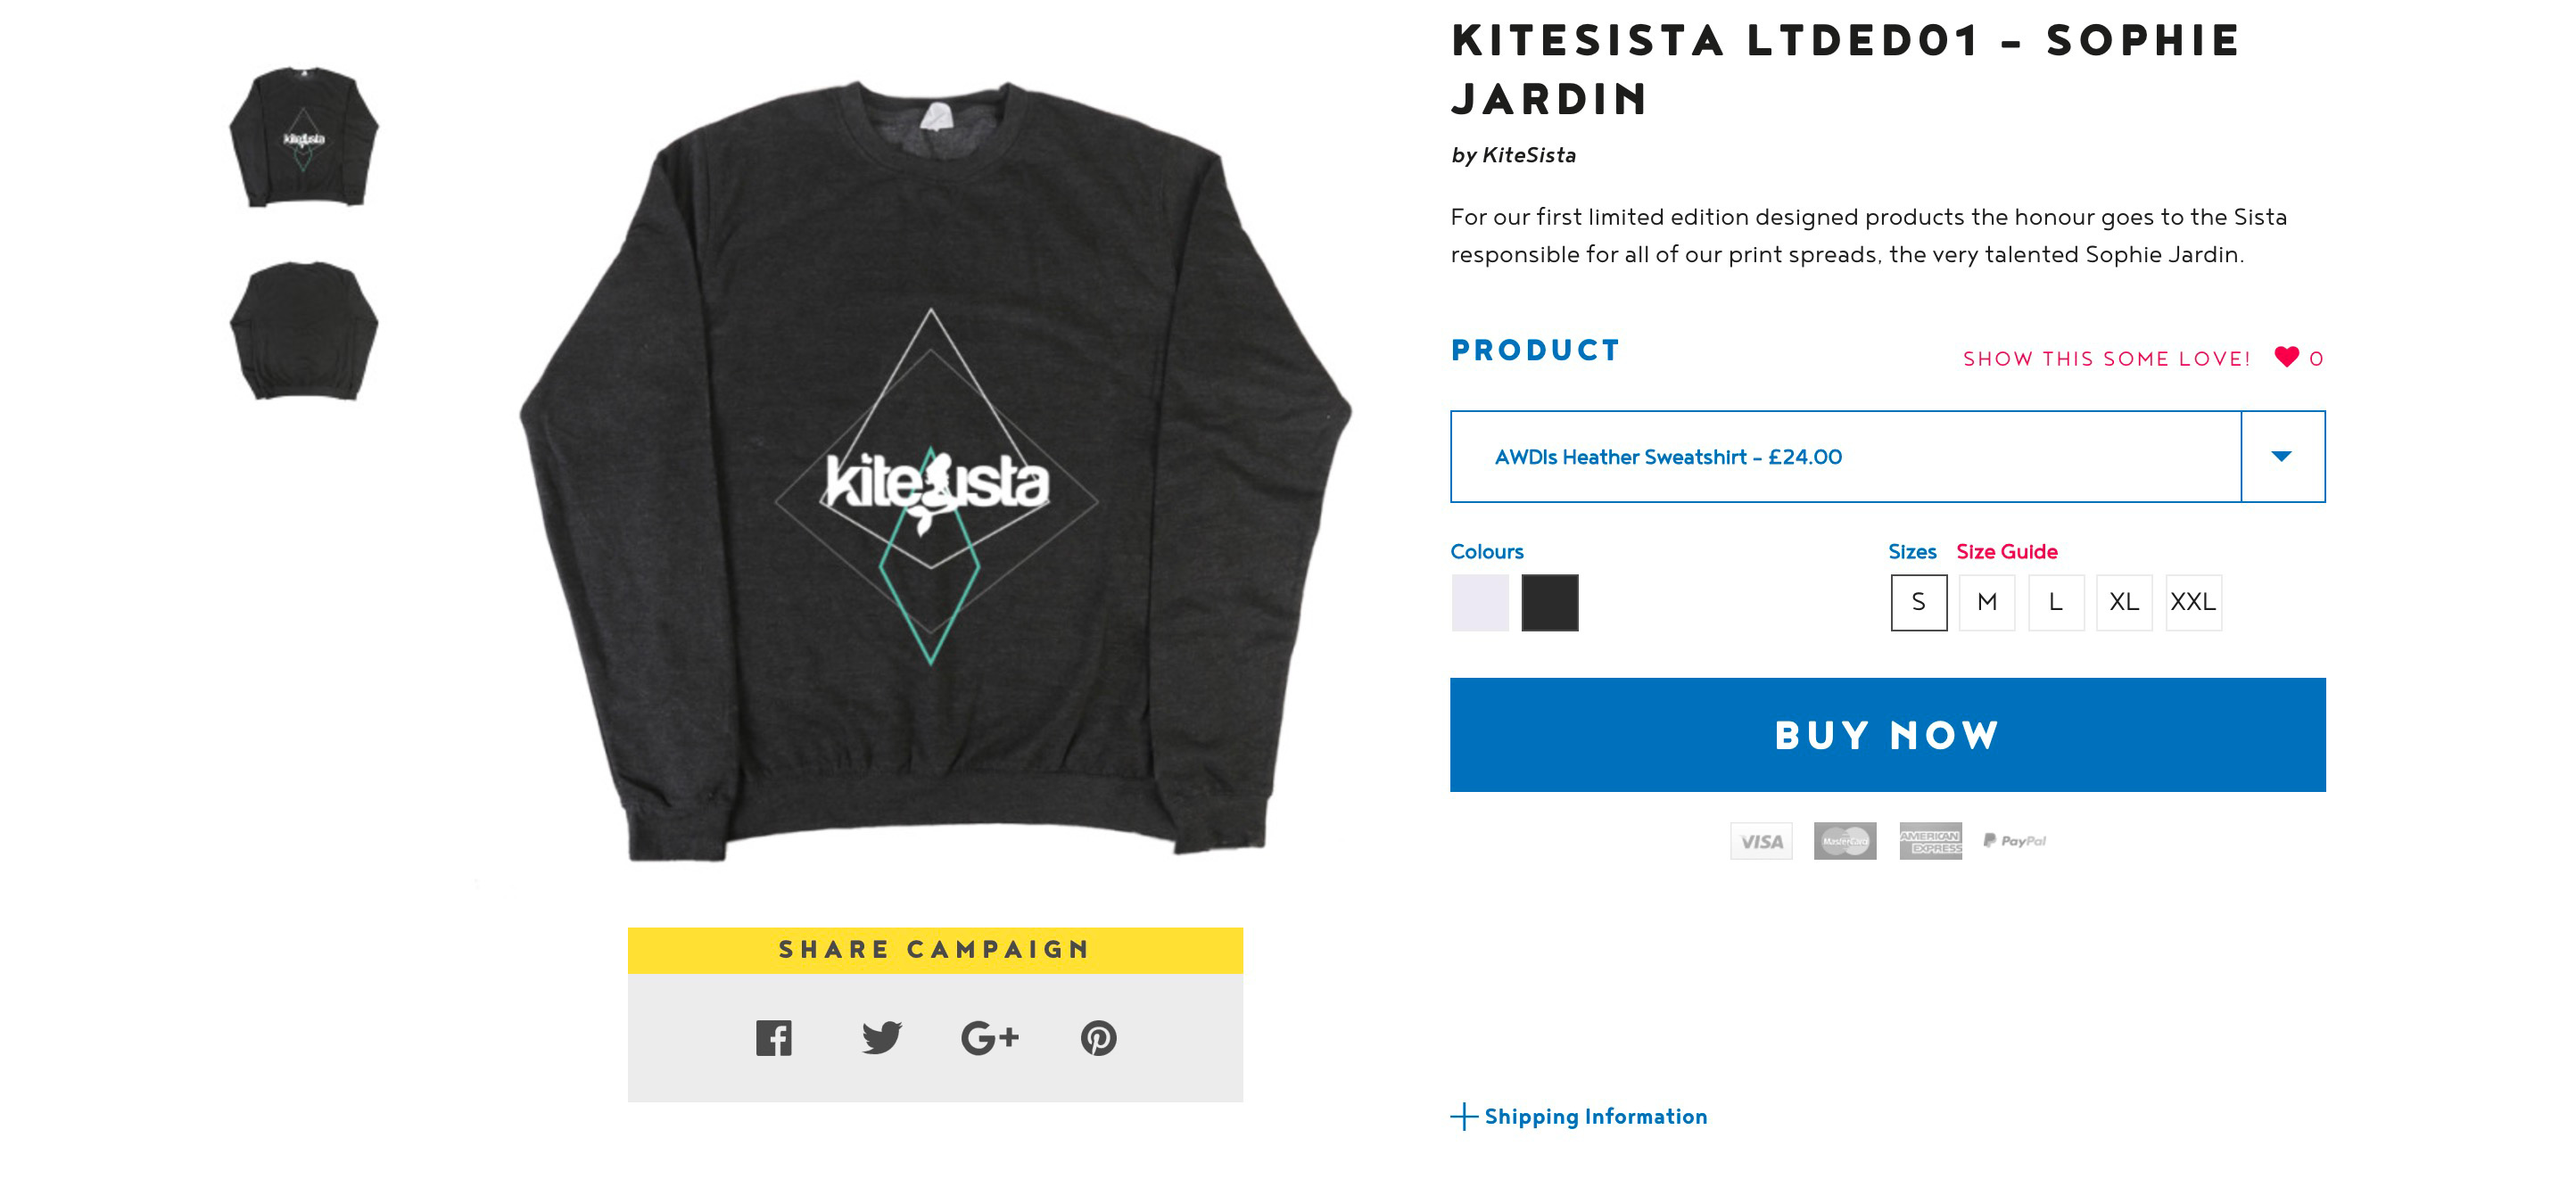 KiteSista Limited Edition Series 01 - Only Available for 14 Days ...